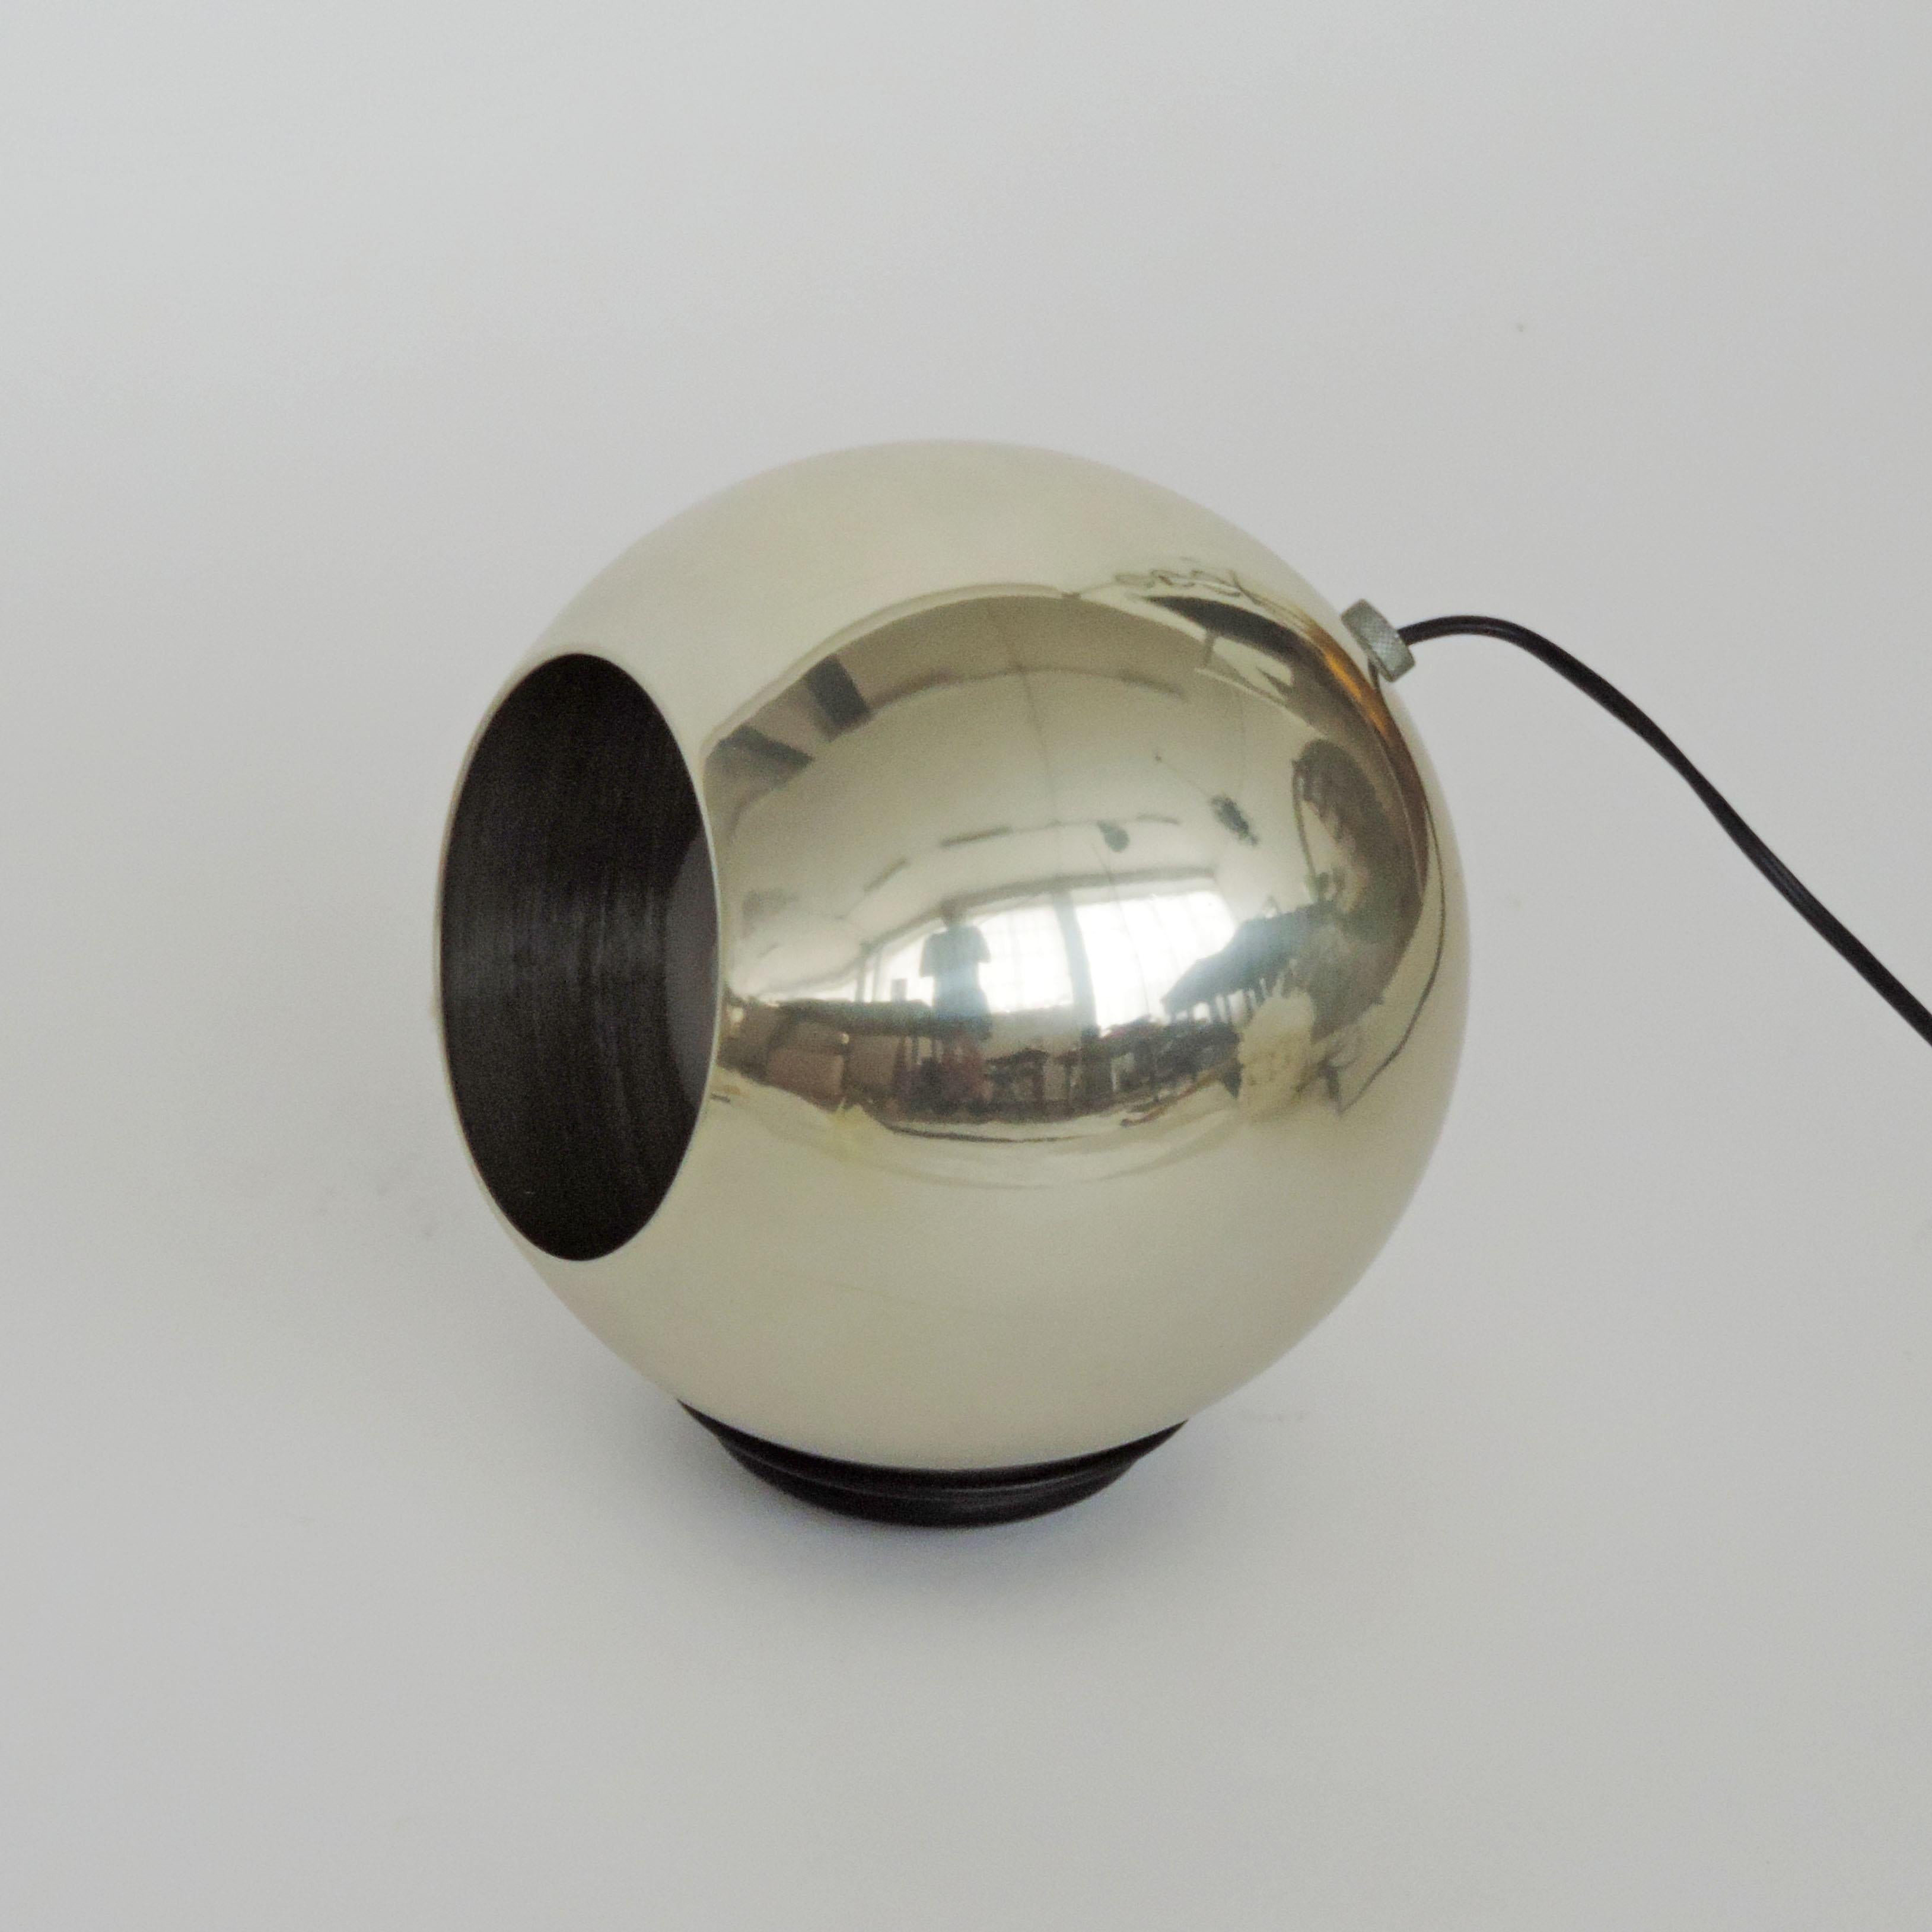 Gino Sarfatti iconic ball table lamp for Arteluce Mod. 586, Italy 1960s
Original Label, Original wiring.
Superb patina, and condition.